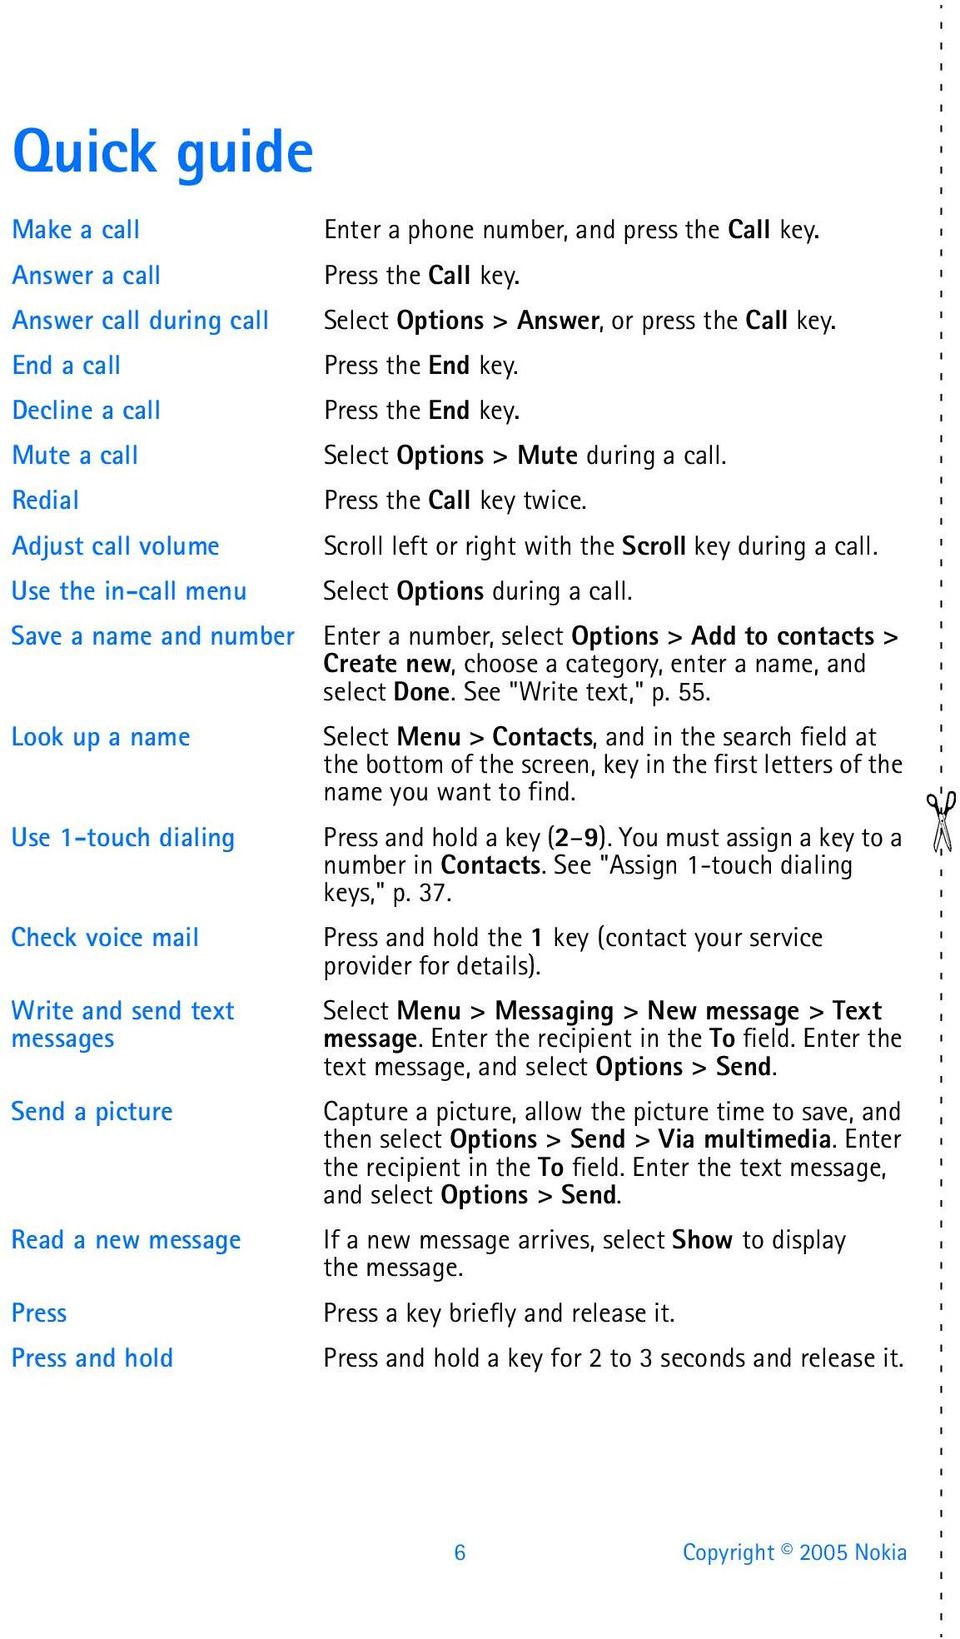 Adjust call volume Scroll left or right with the Scroll key during a call. Use the in-call menu Select Options during a call.